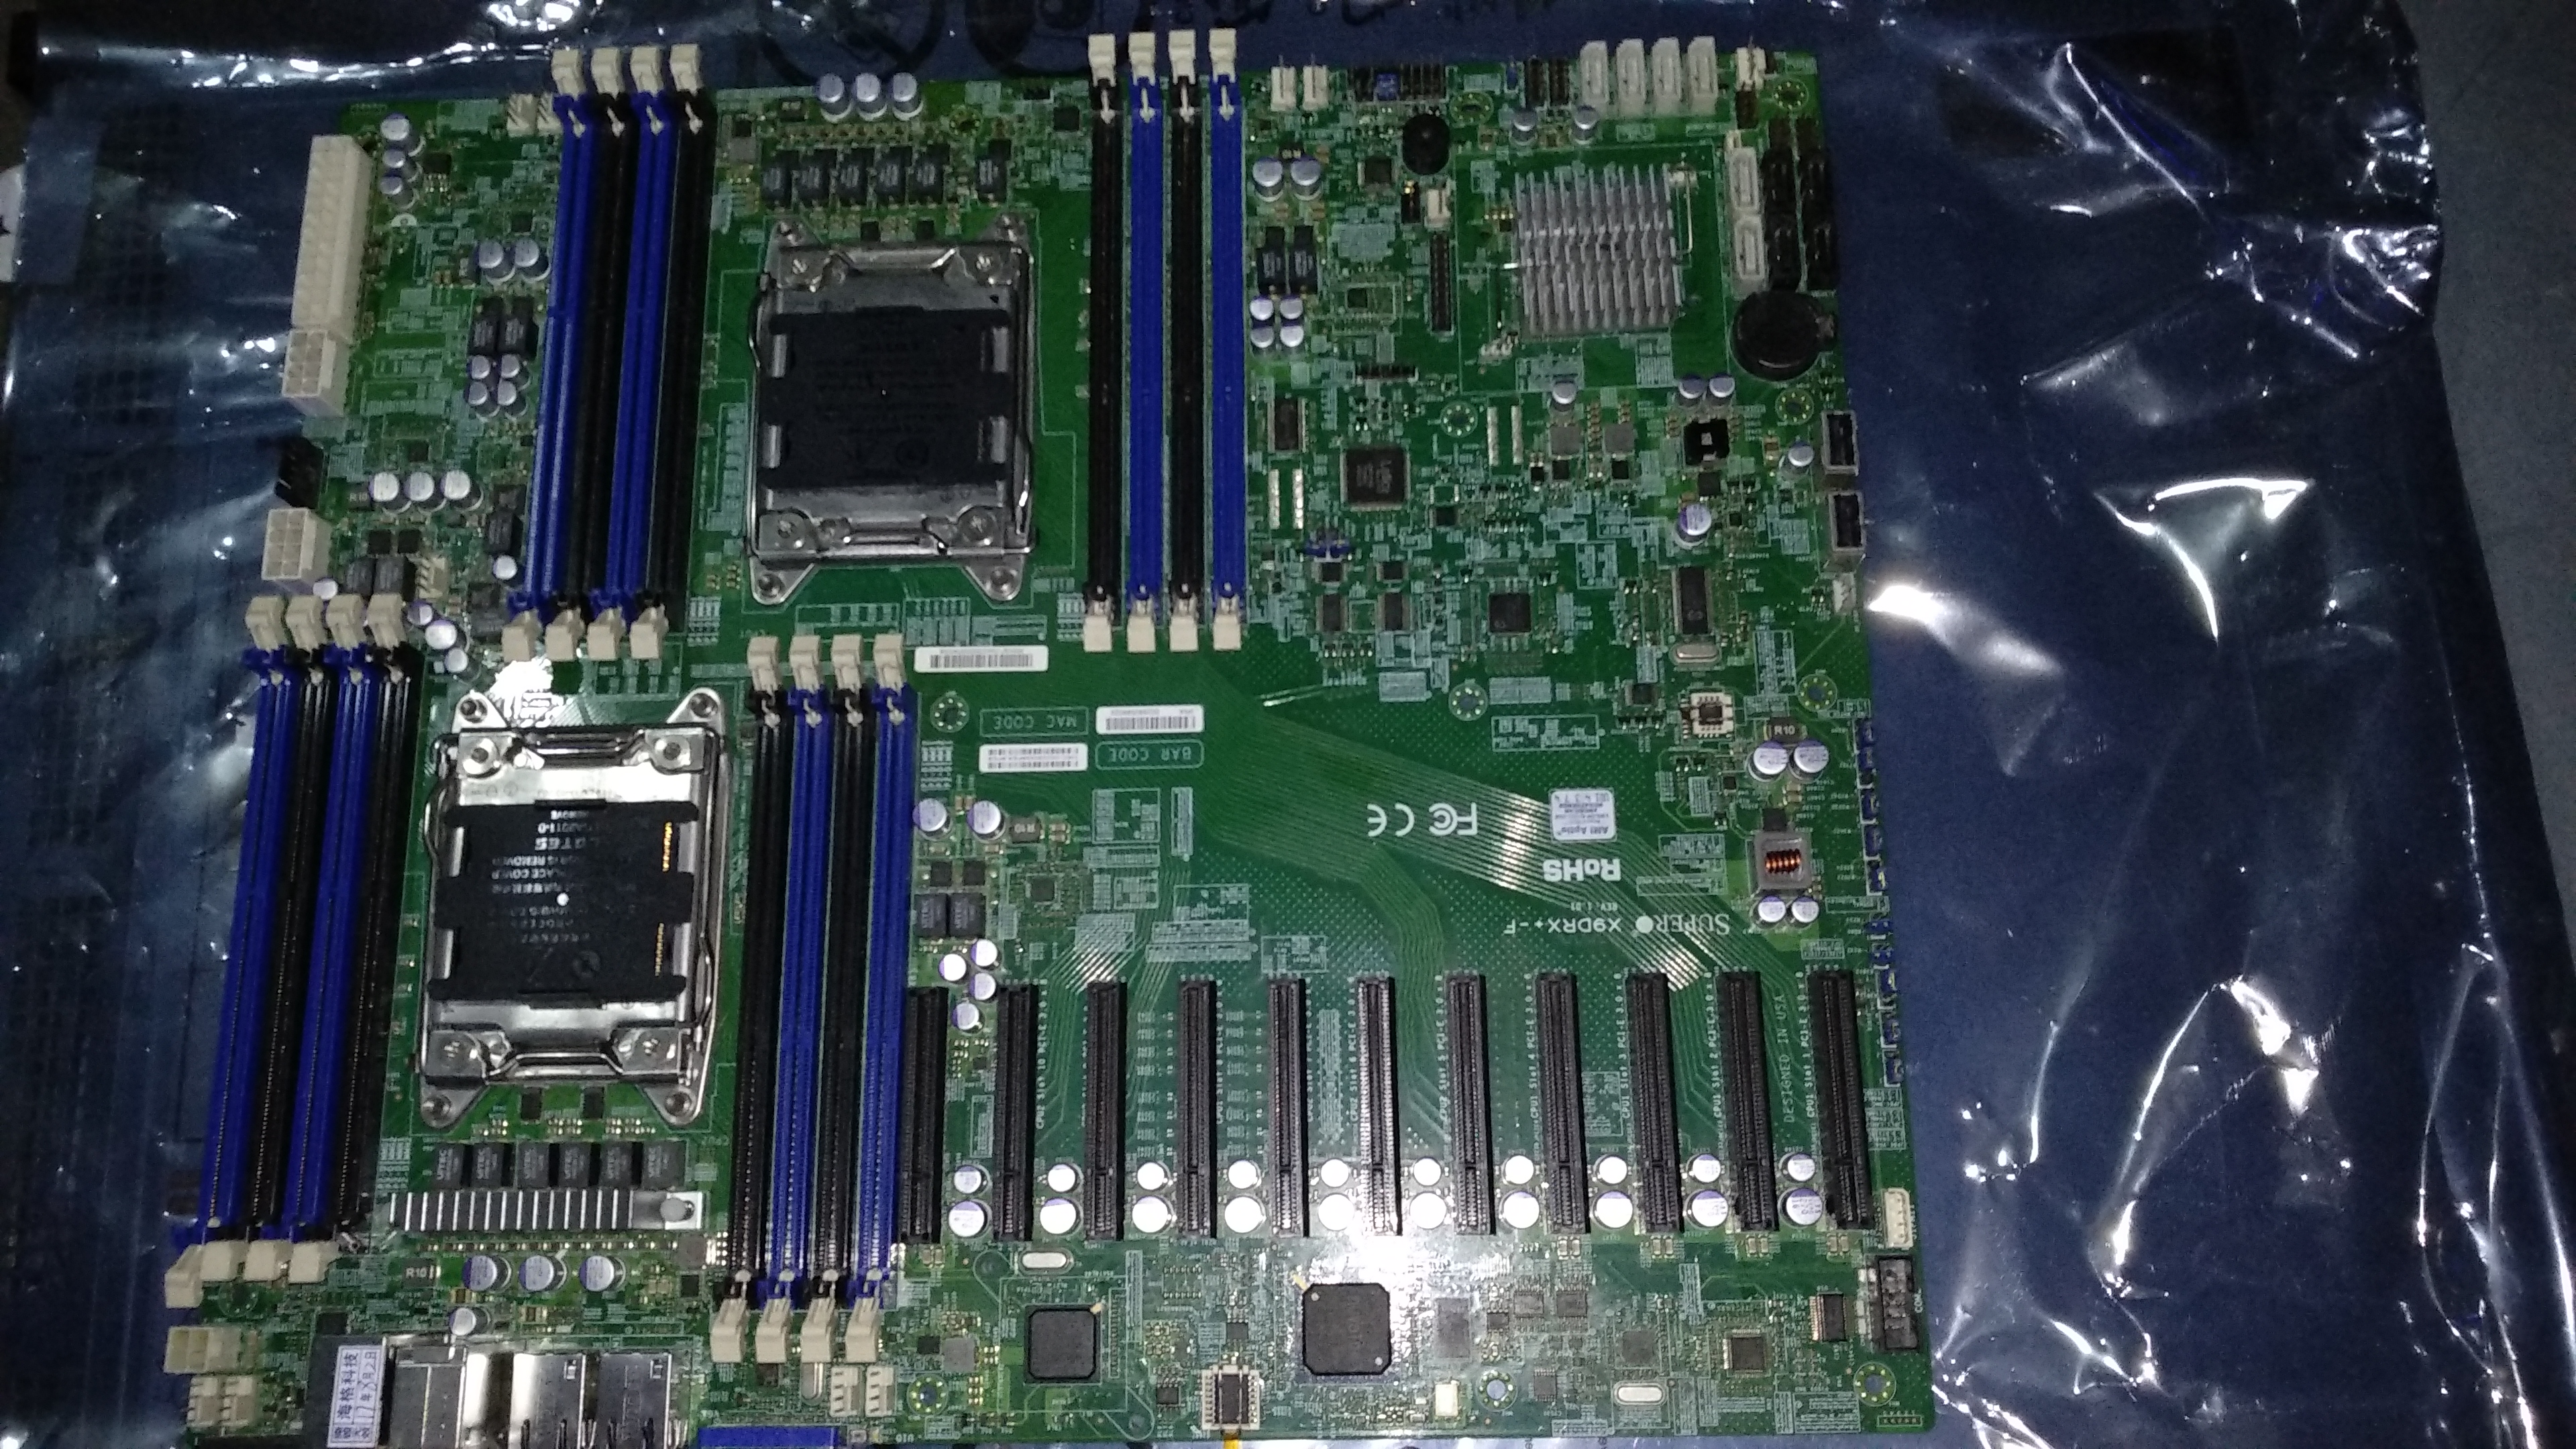 Above: KV-Direct's motherboard, bought on Xianyu for 2000 yuan